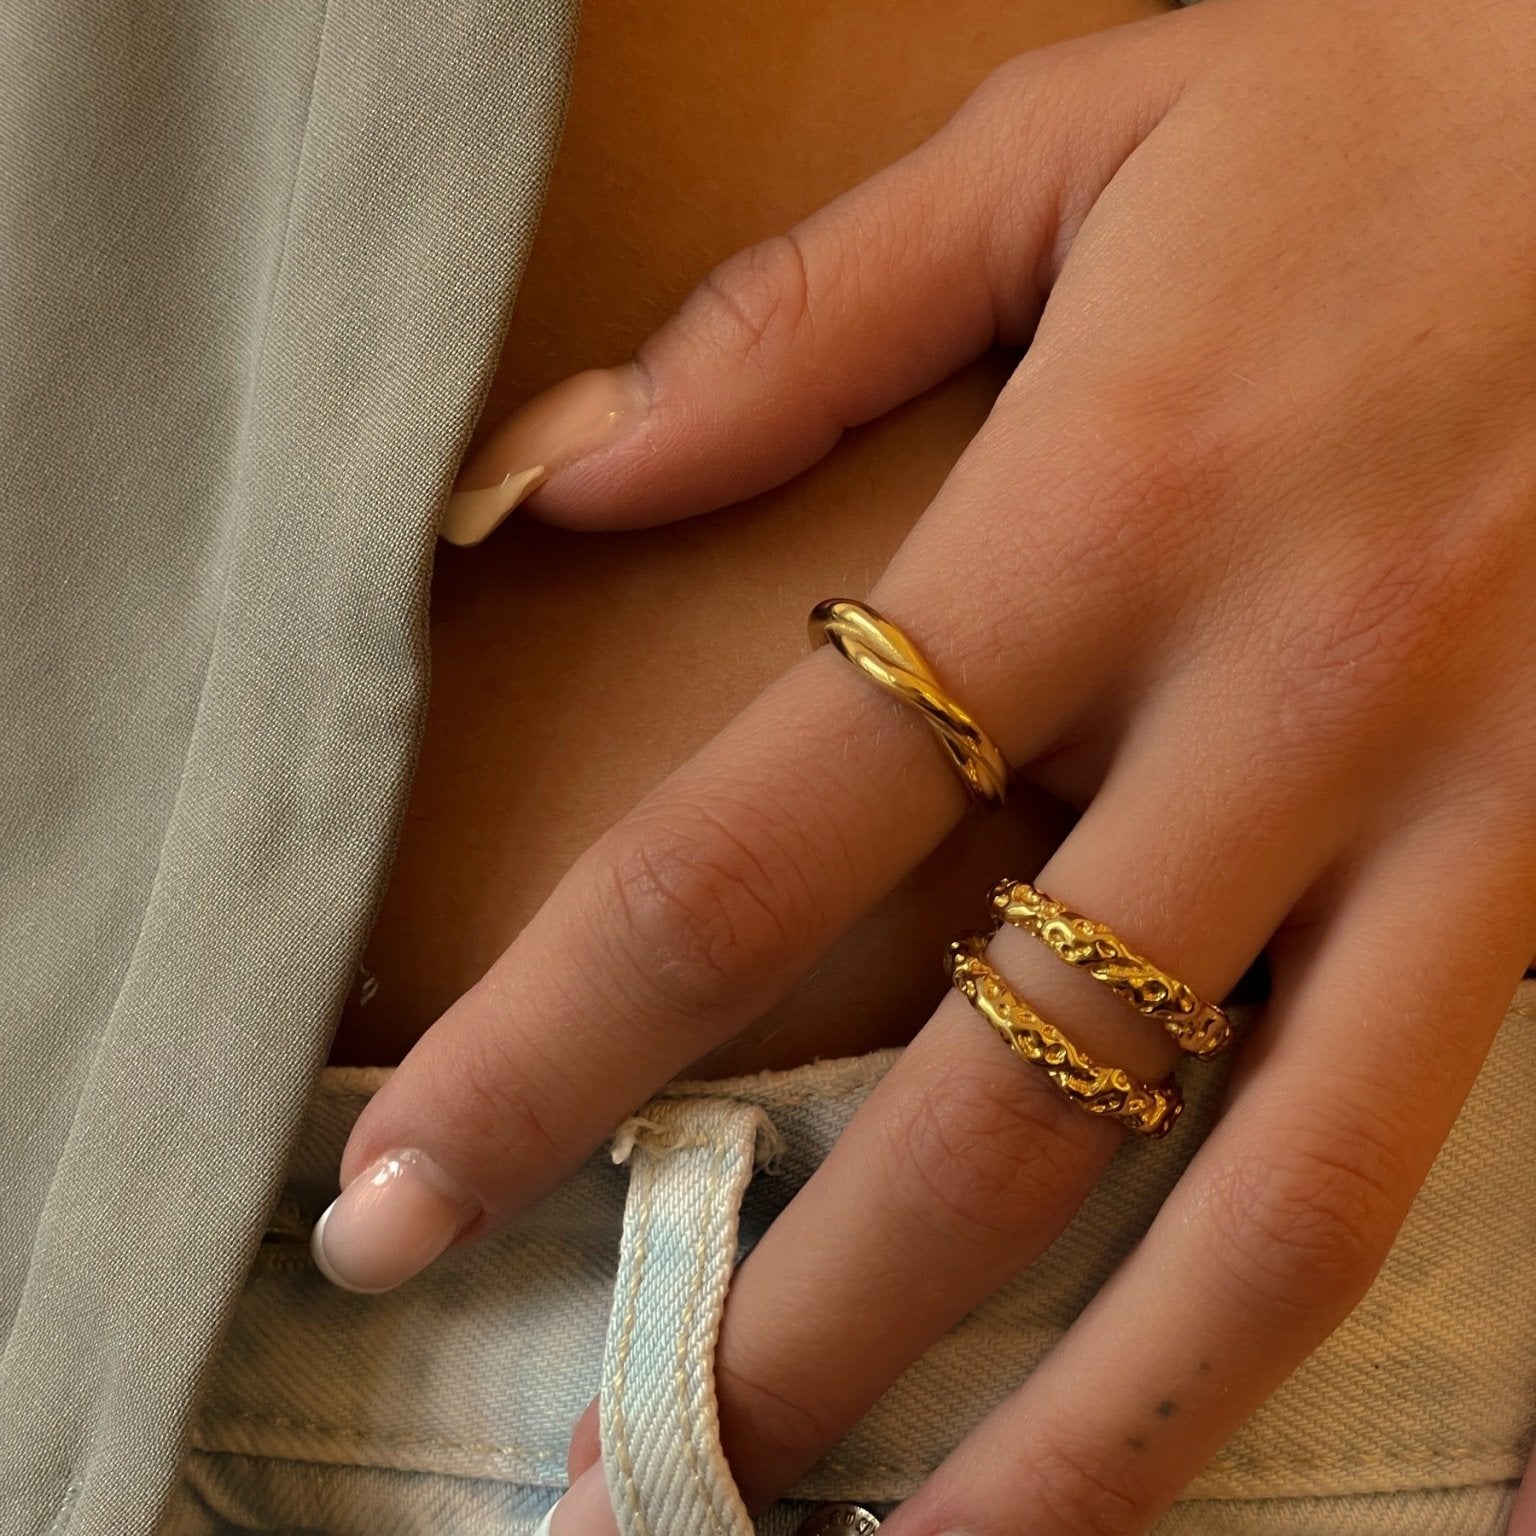 Cheyenne Twisted Gold Ring by Koréil Jewelry